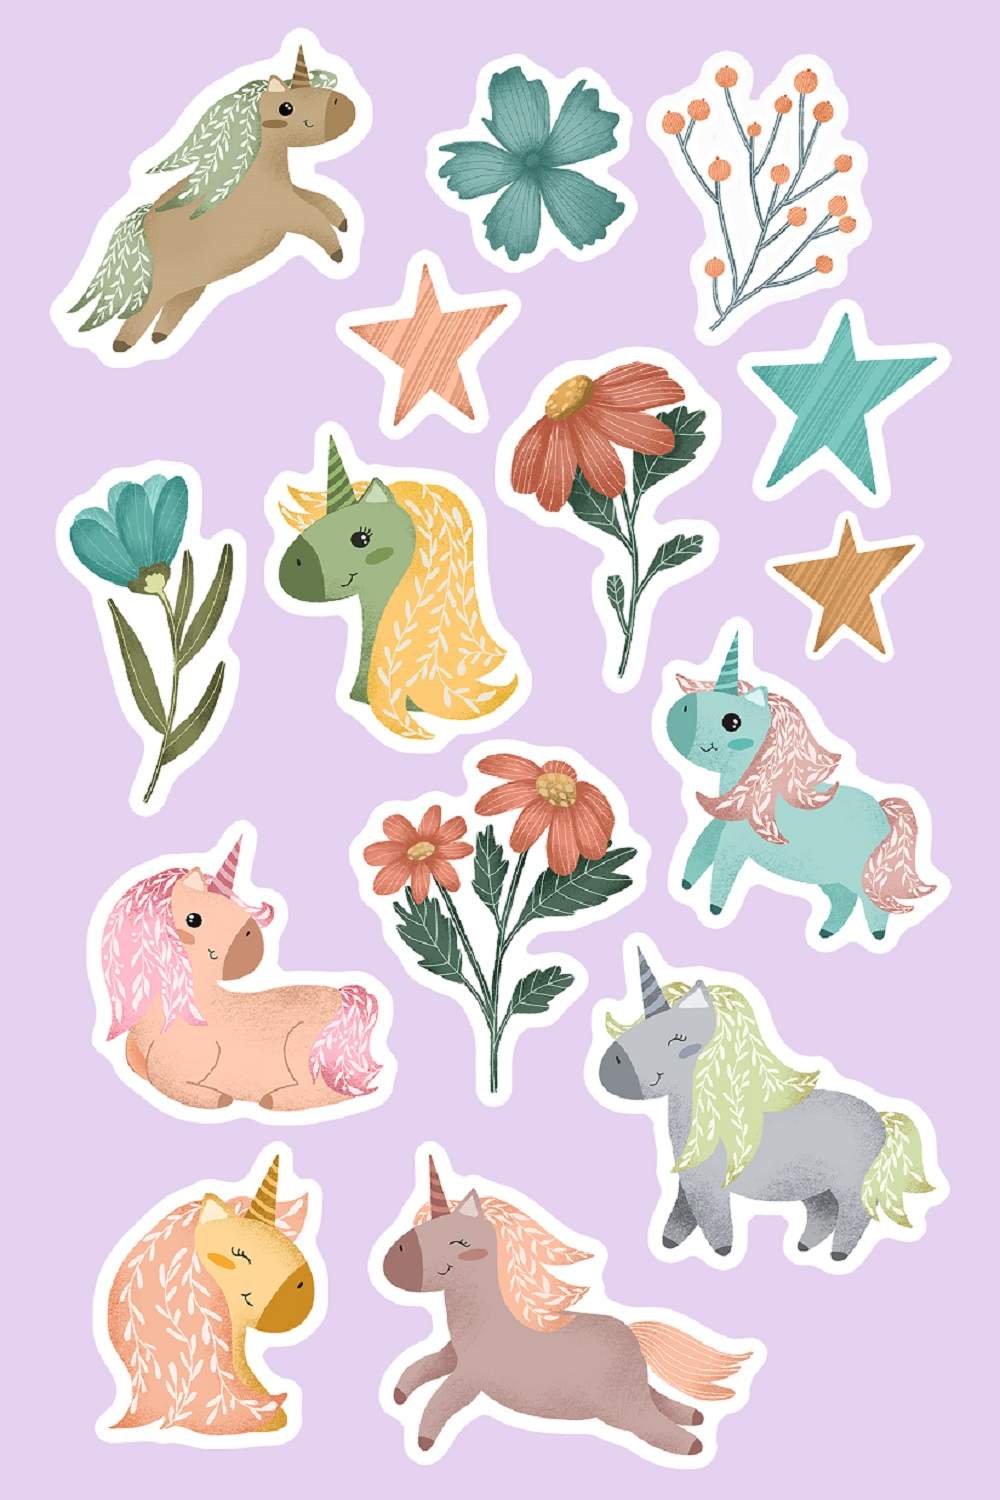 Unicorn sticker pack pinterest preview image.